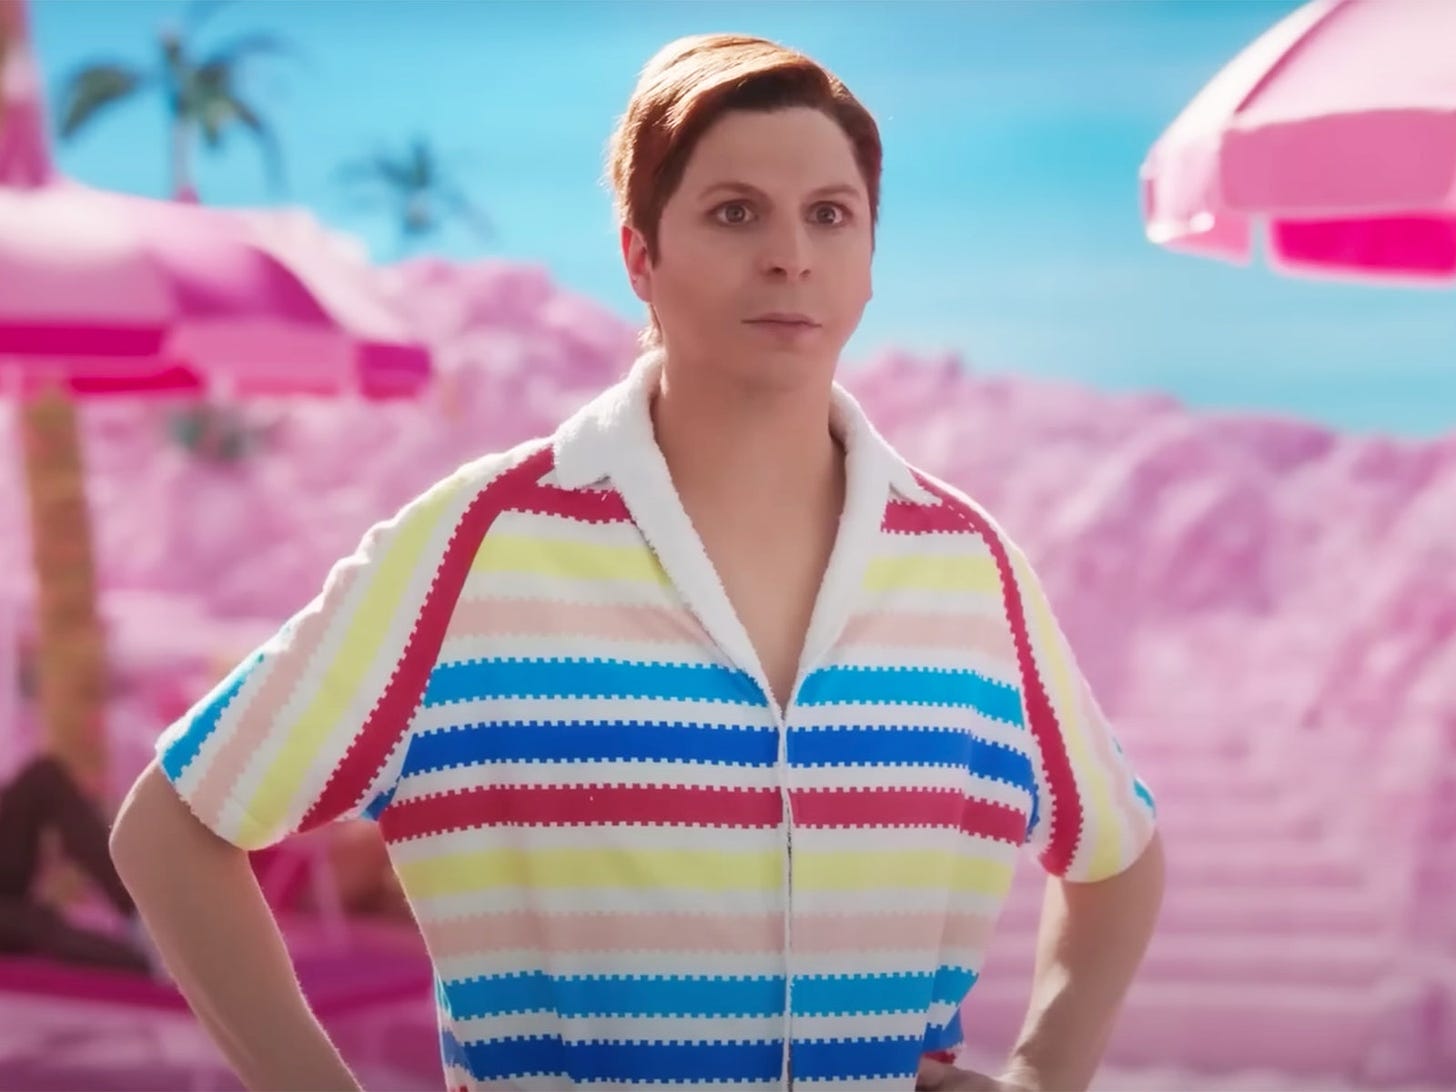 Who Is Allan, Michael Cera's Character in the 'Barbie' Movie? | GQ